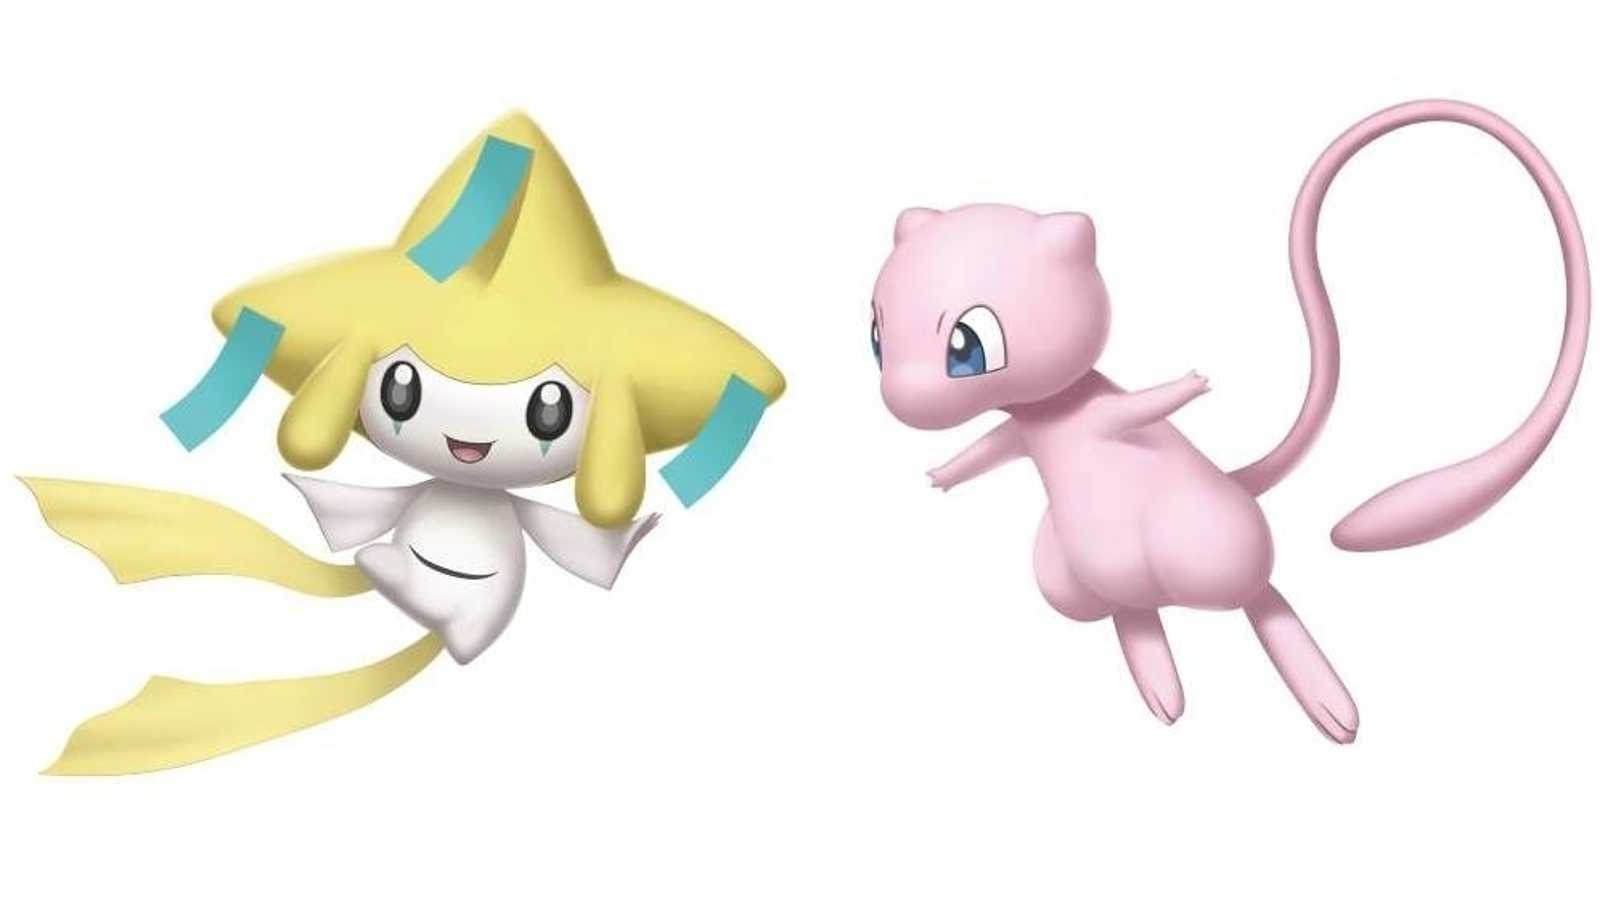 How to Get Mew - Pokemon Diamond, Pearl and Platinum Guide - IGN